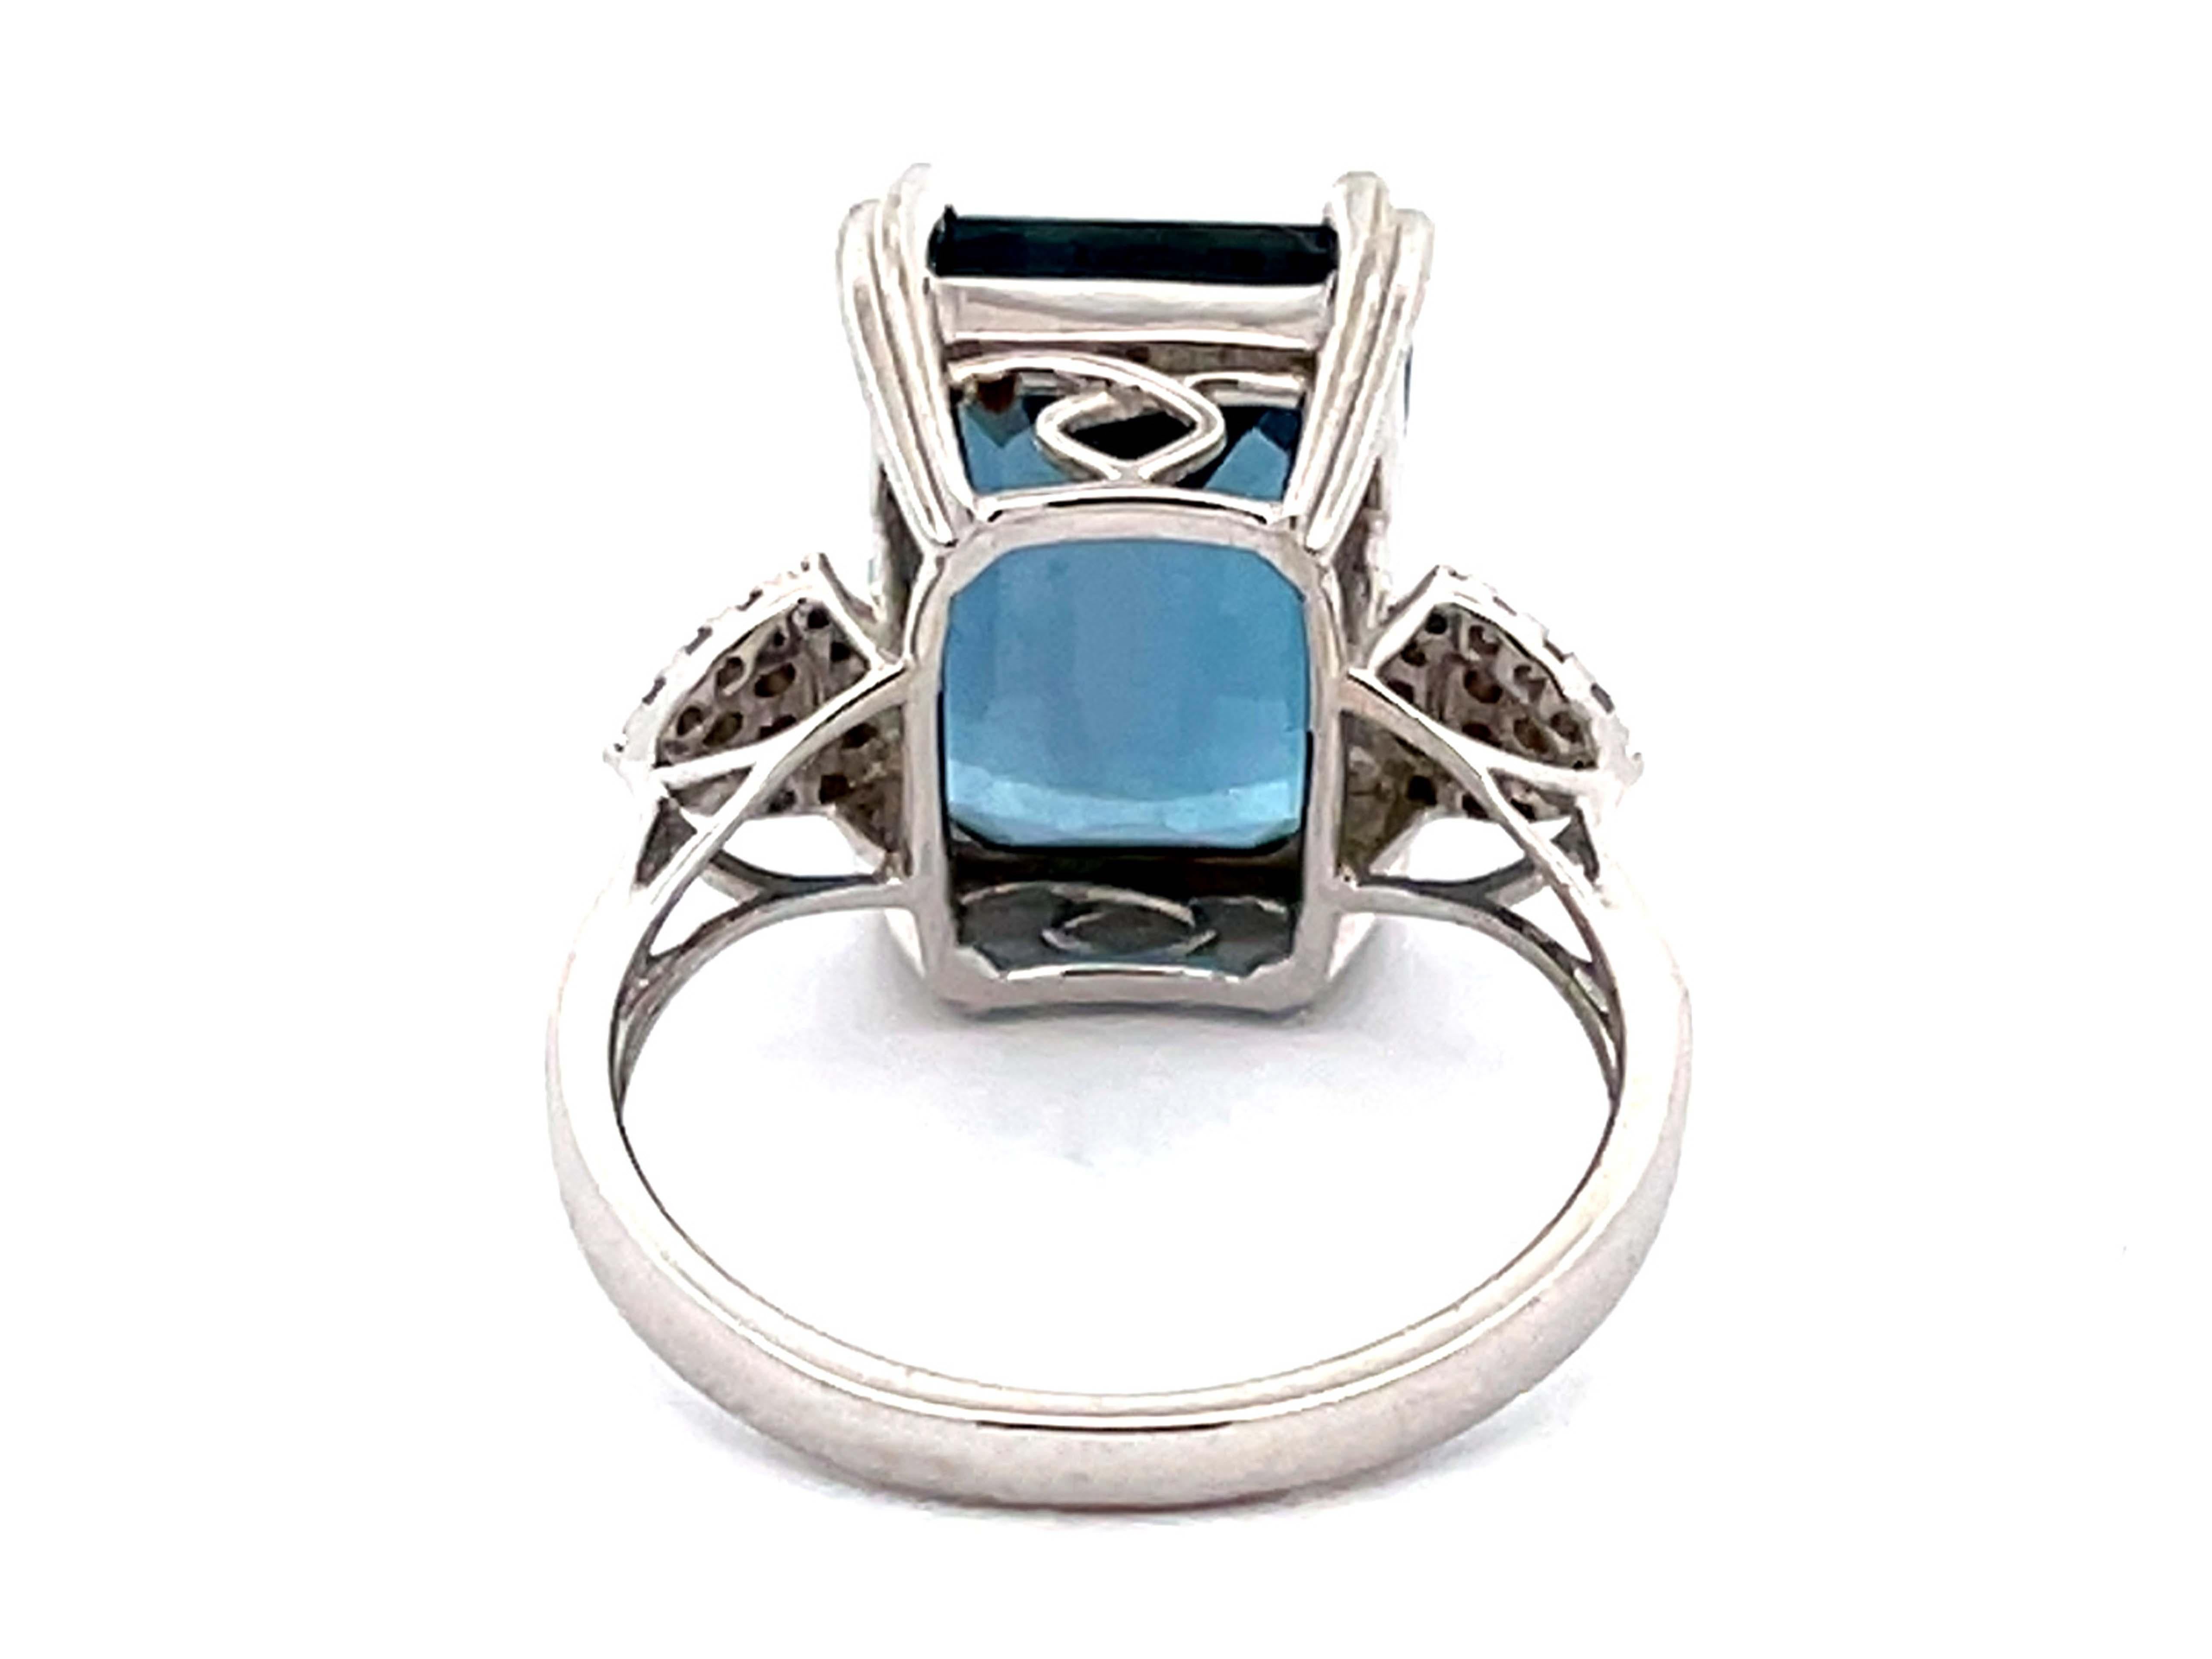 Brilliant Cut Effy Imperial Blue Topaz and Diamond Ring in 14k White Gold